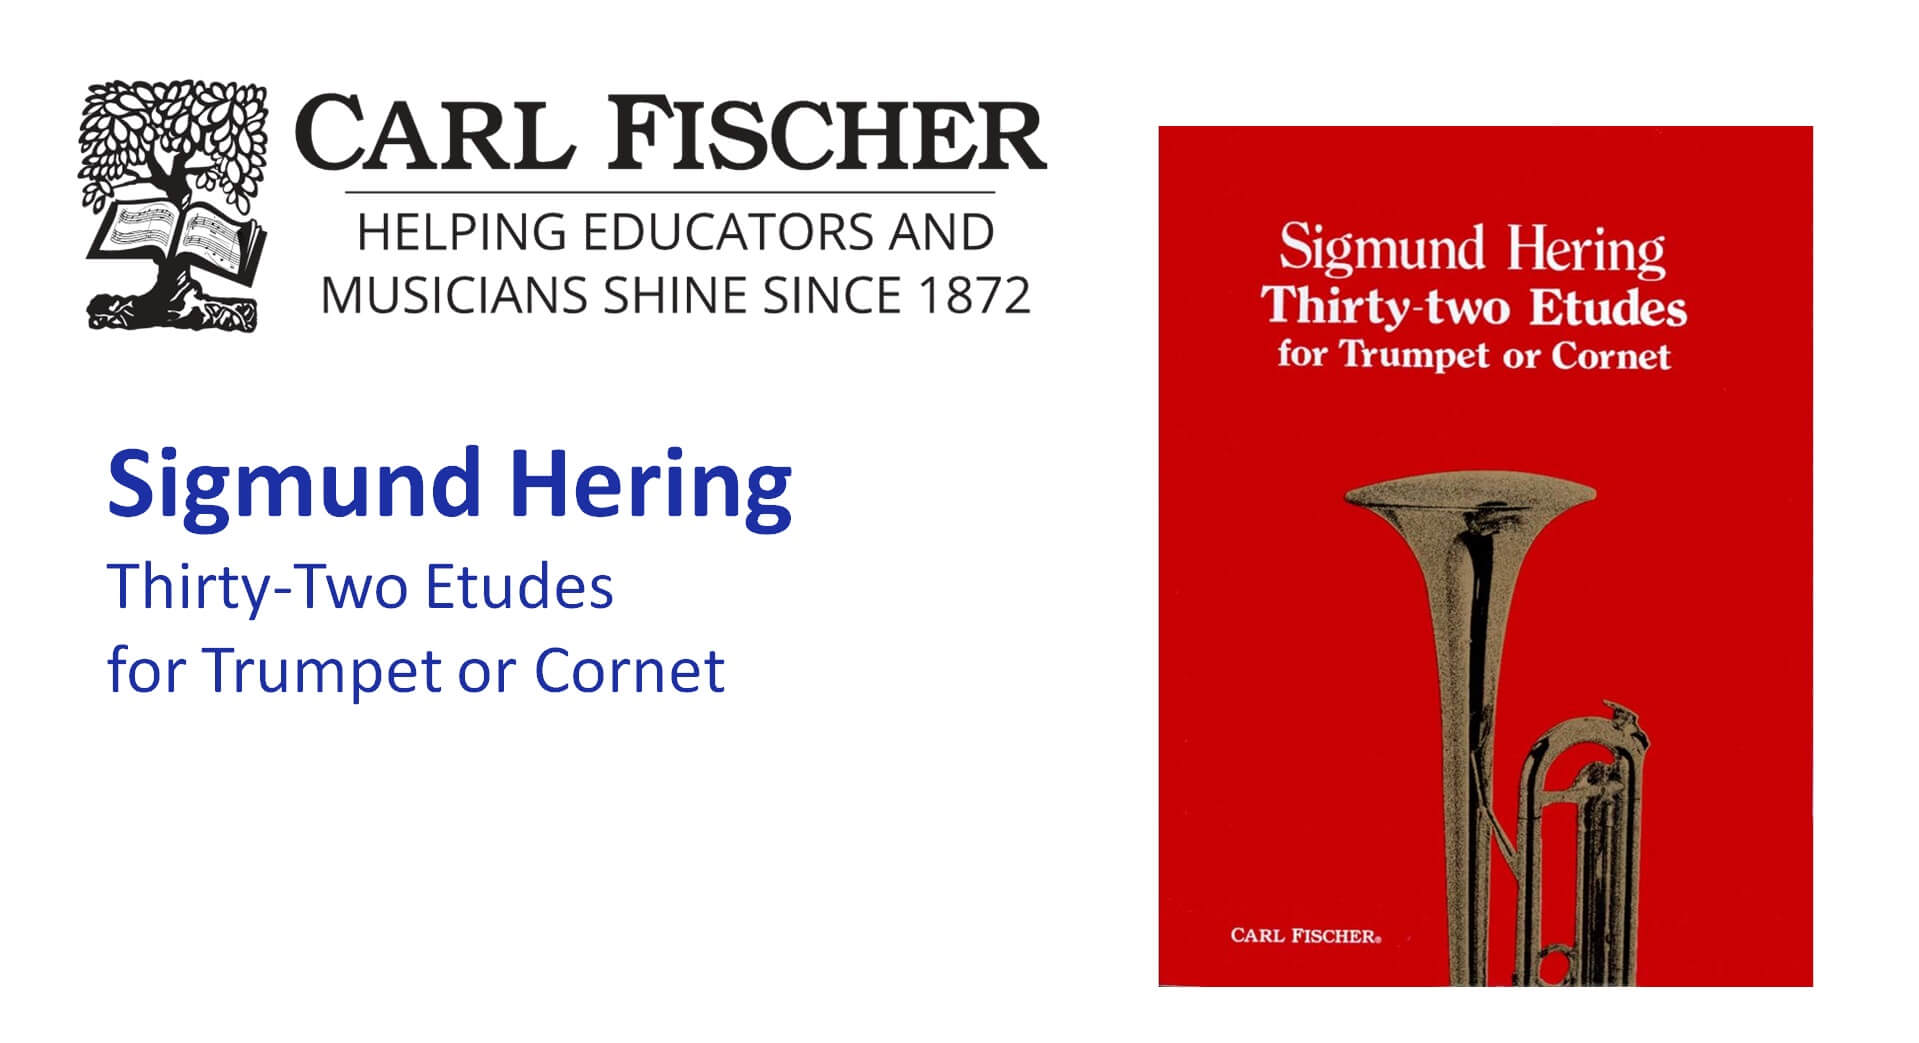 Sigmund Hering Thirty-Two Etudes for Trumpet or Cornet